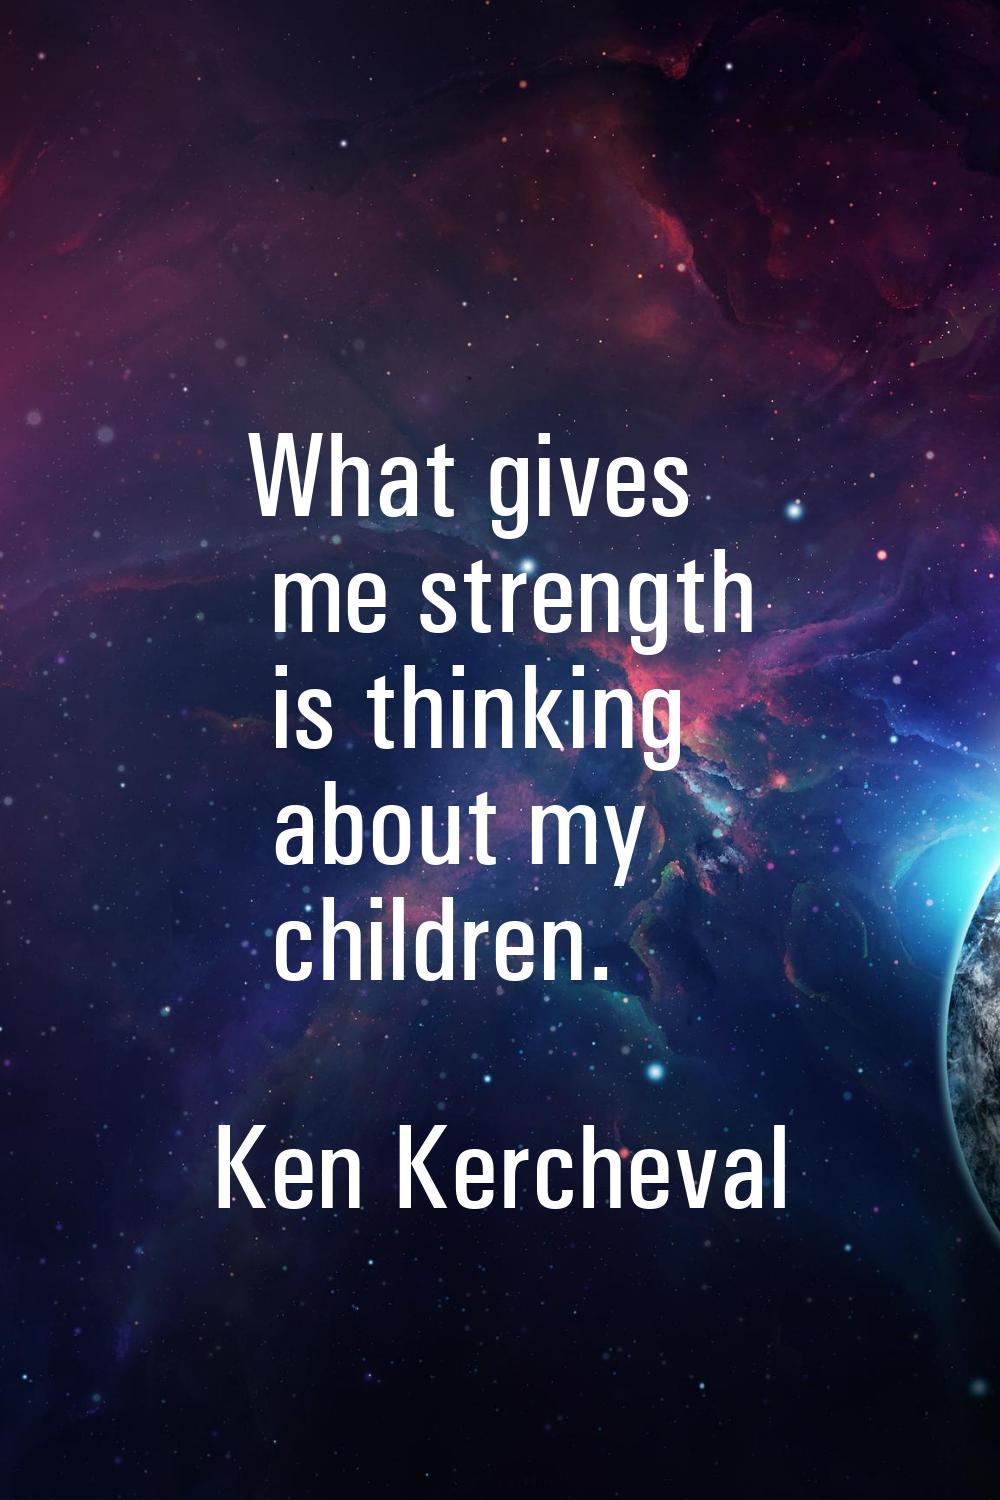 What gives me strength is thinking about my children.